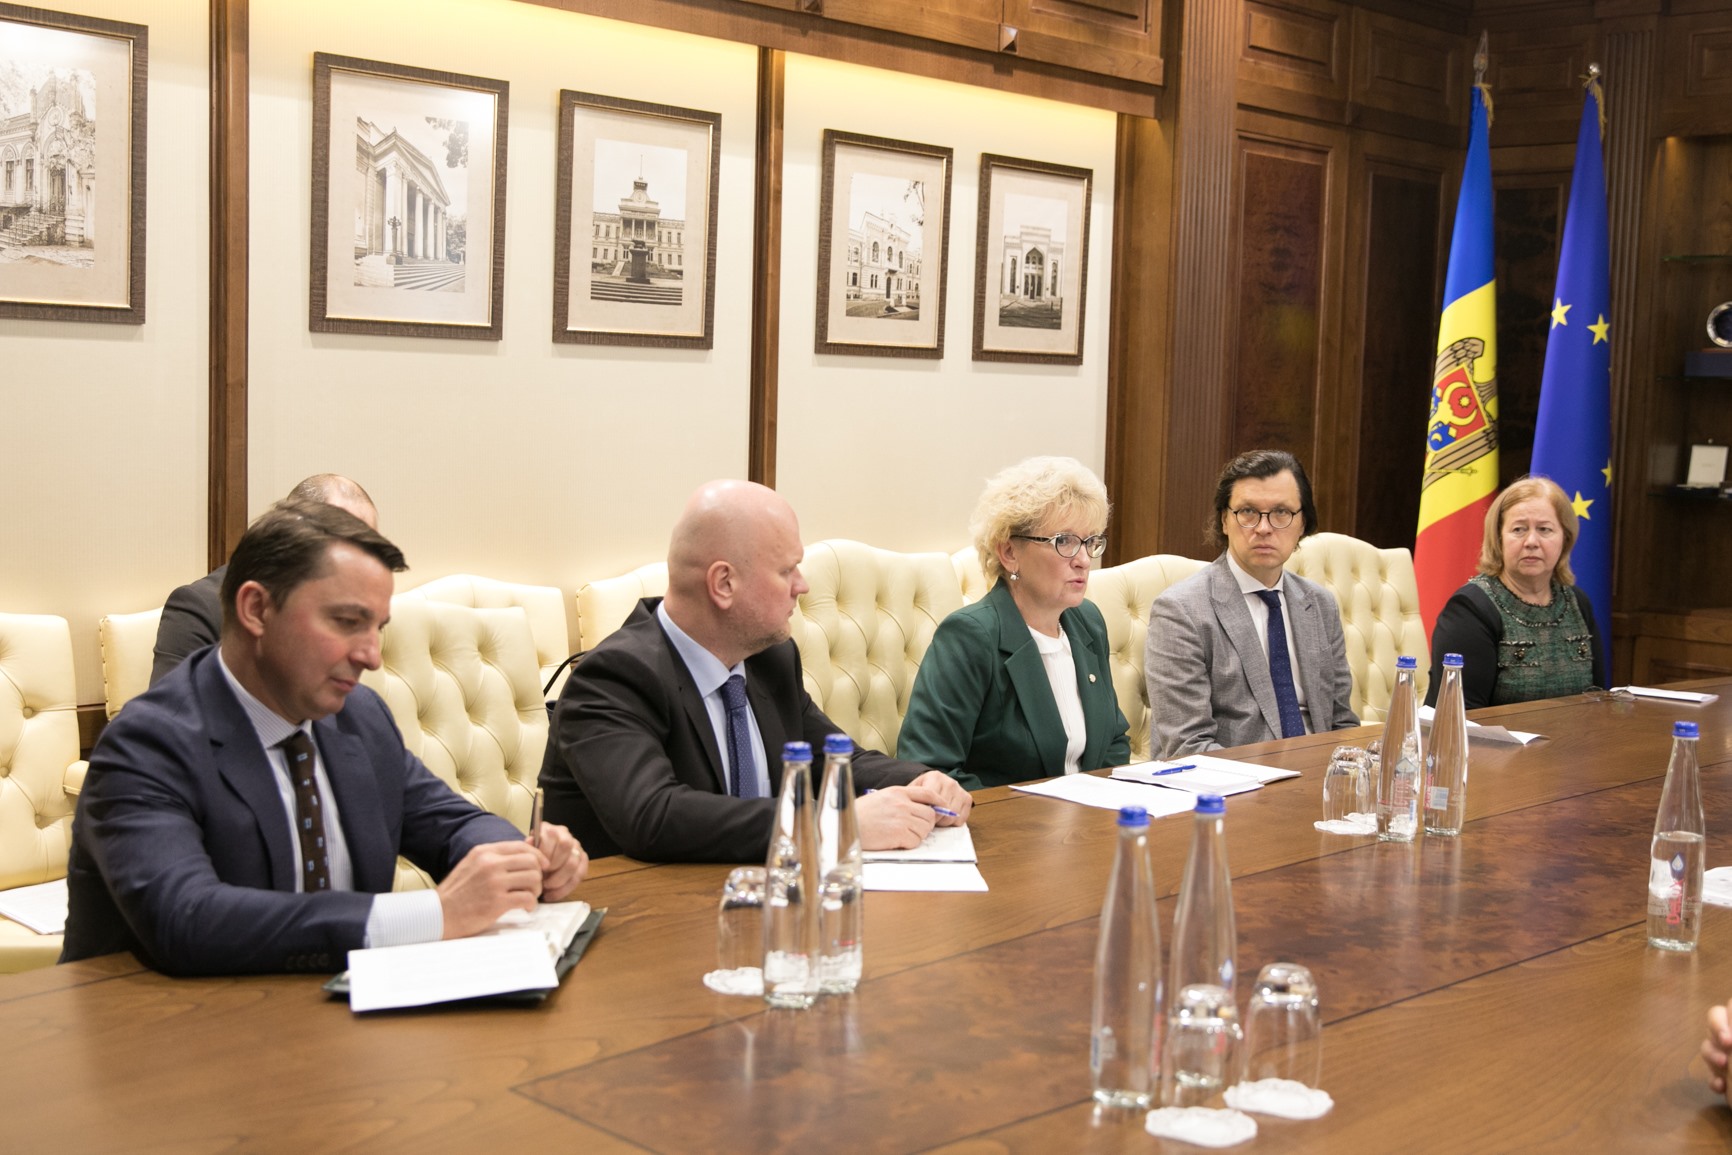 Lithuanian representatives pay the visit of support to Moldova